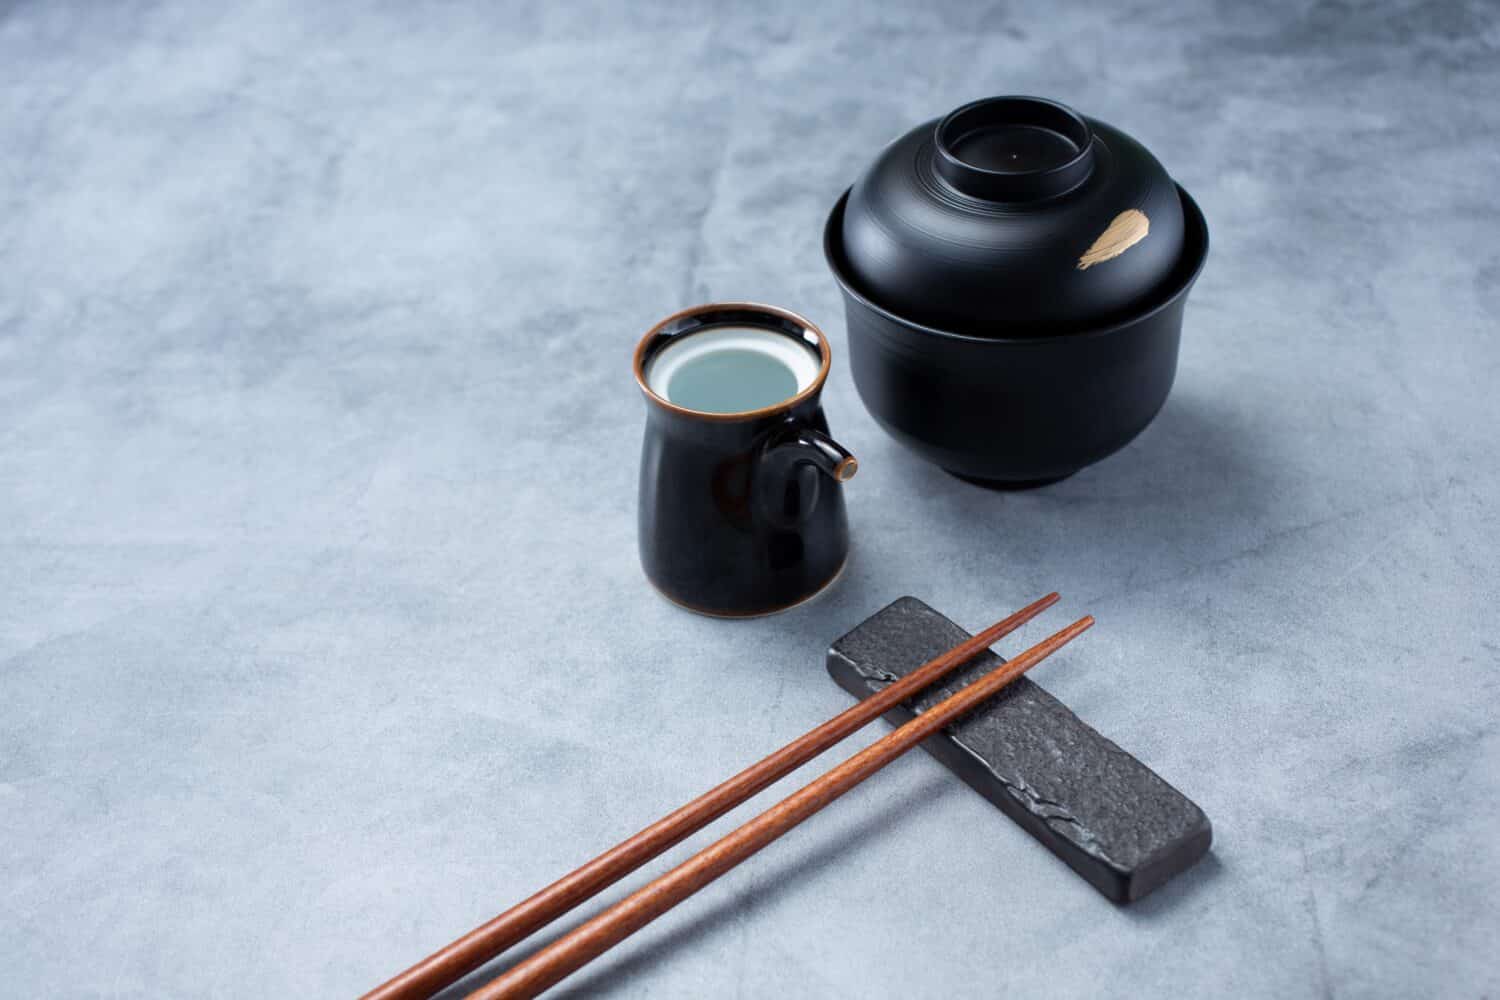 A view of a Japanese restaurant place setting, featuring chopsticks and soy sauce dishware.